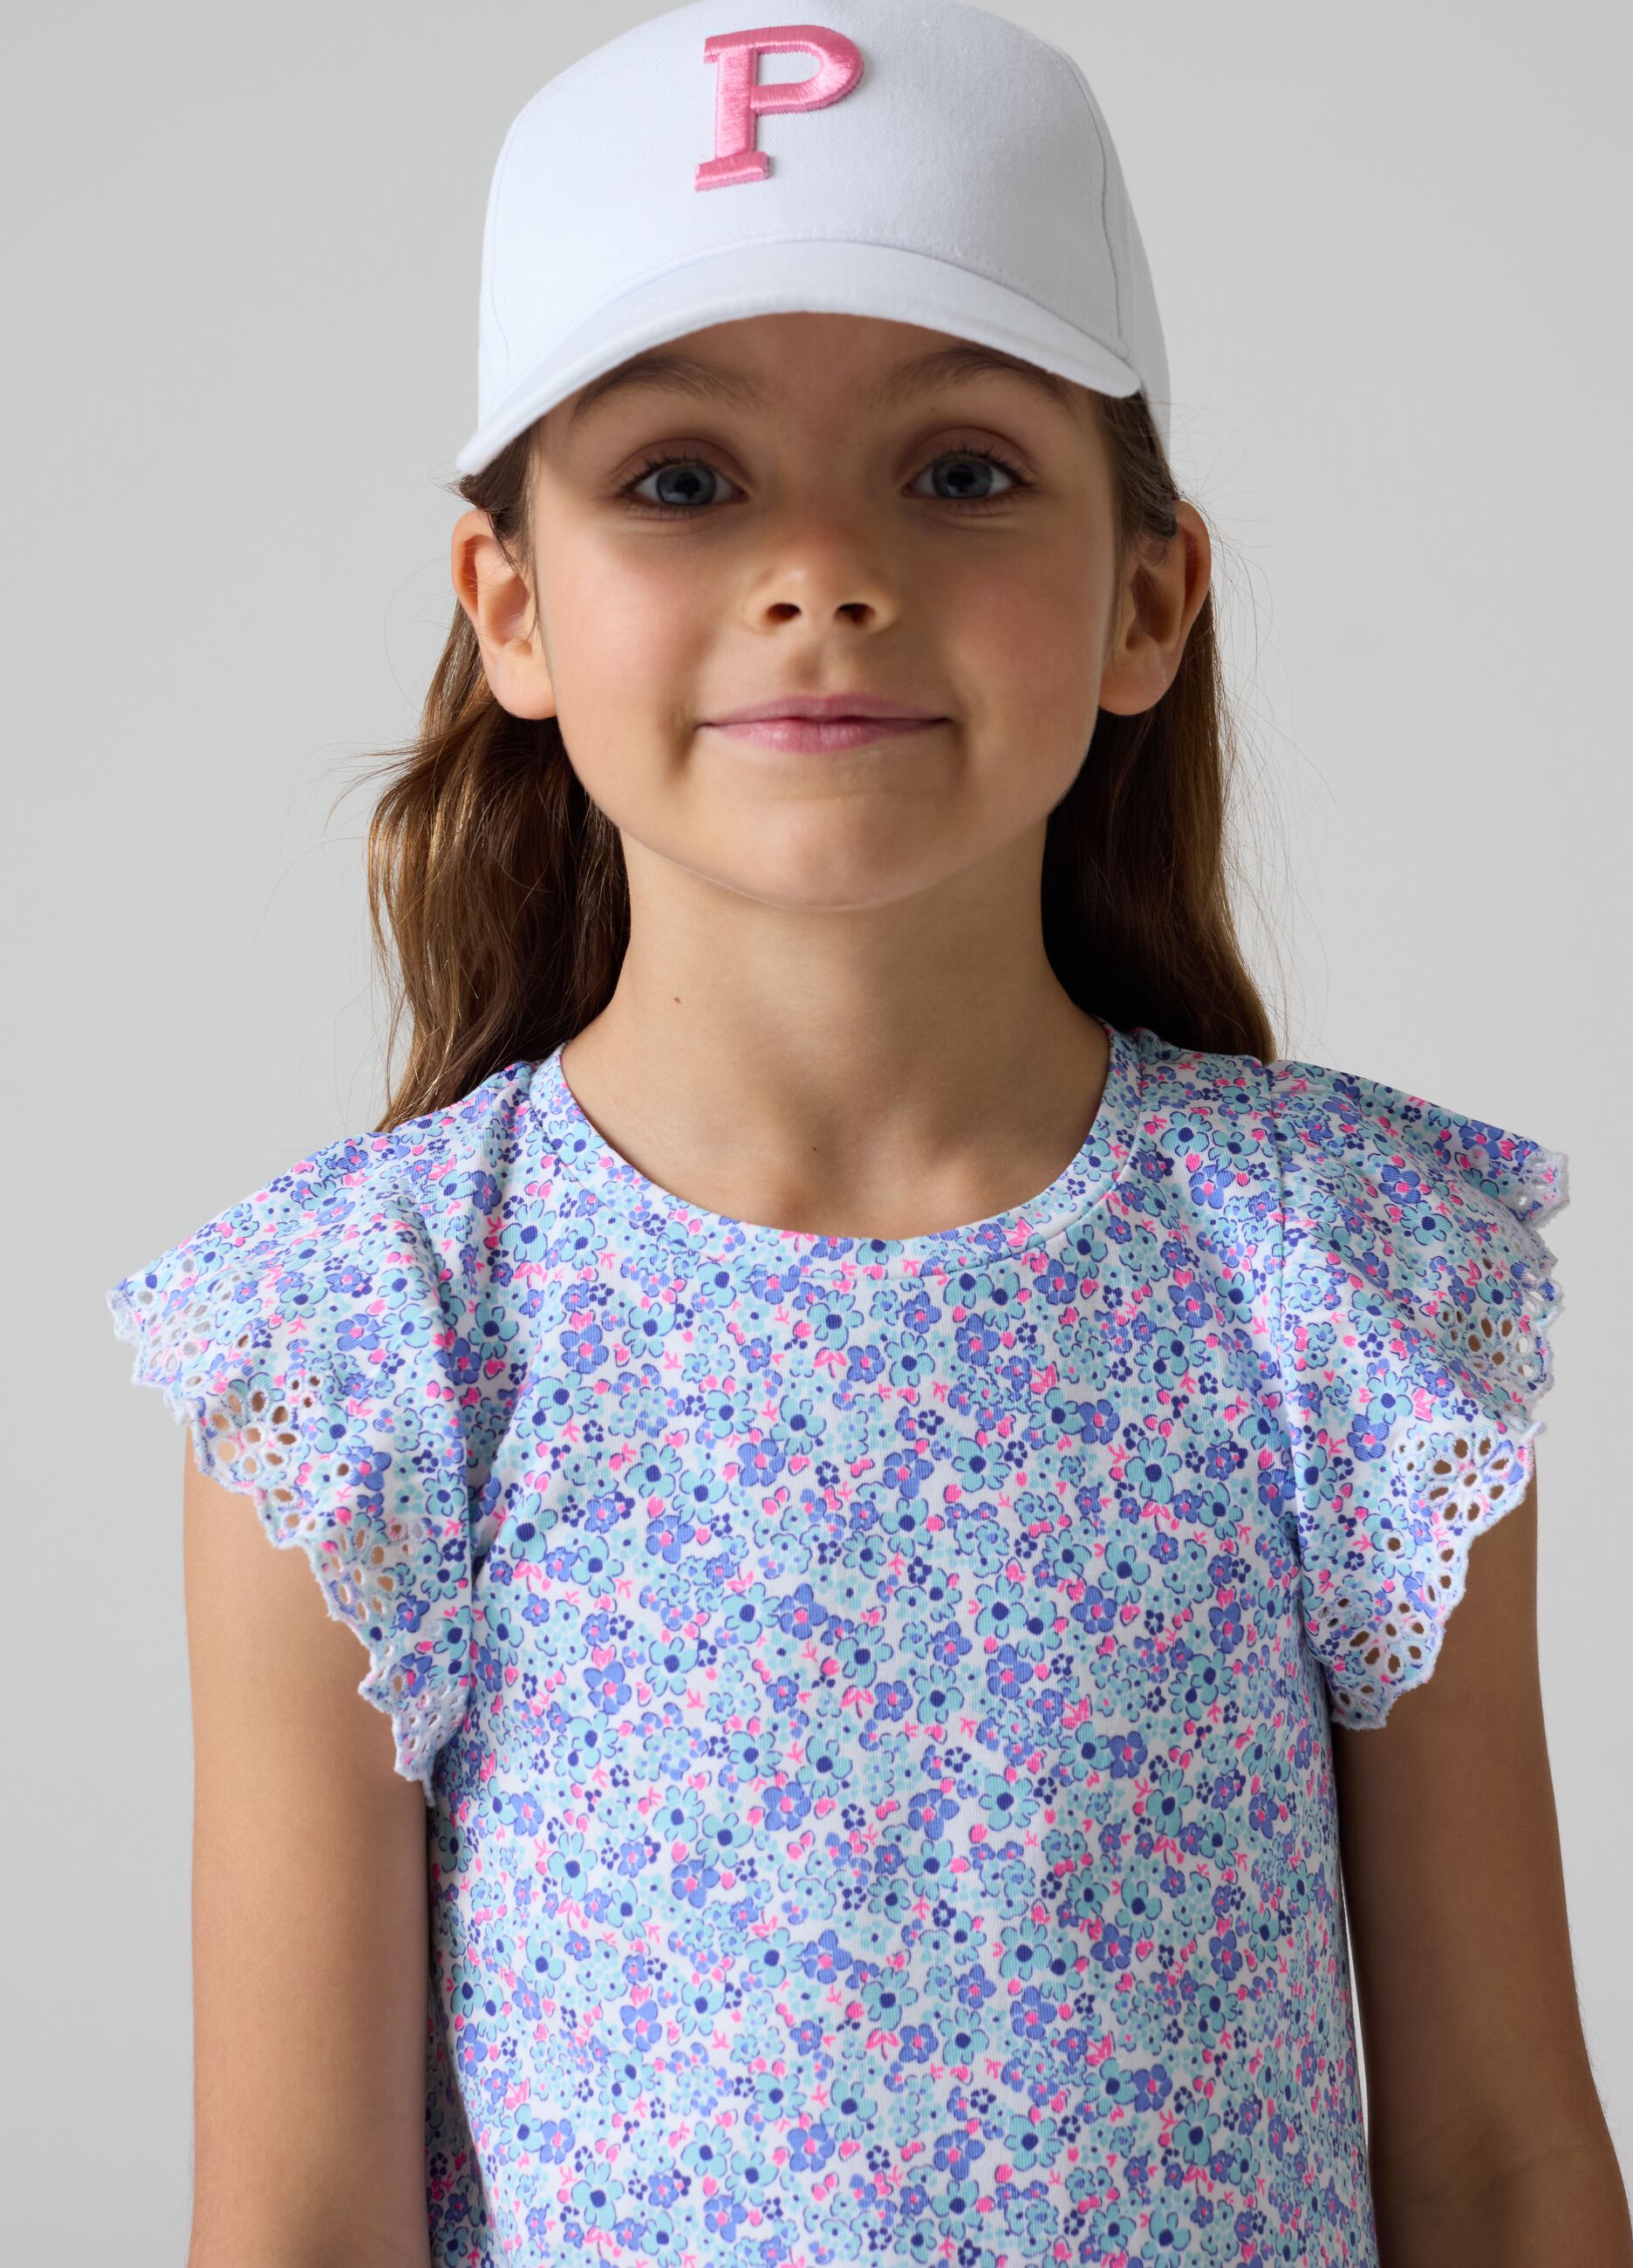 T-shirt with print and broderie anglaise embroidery